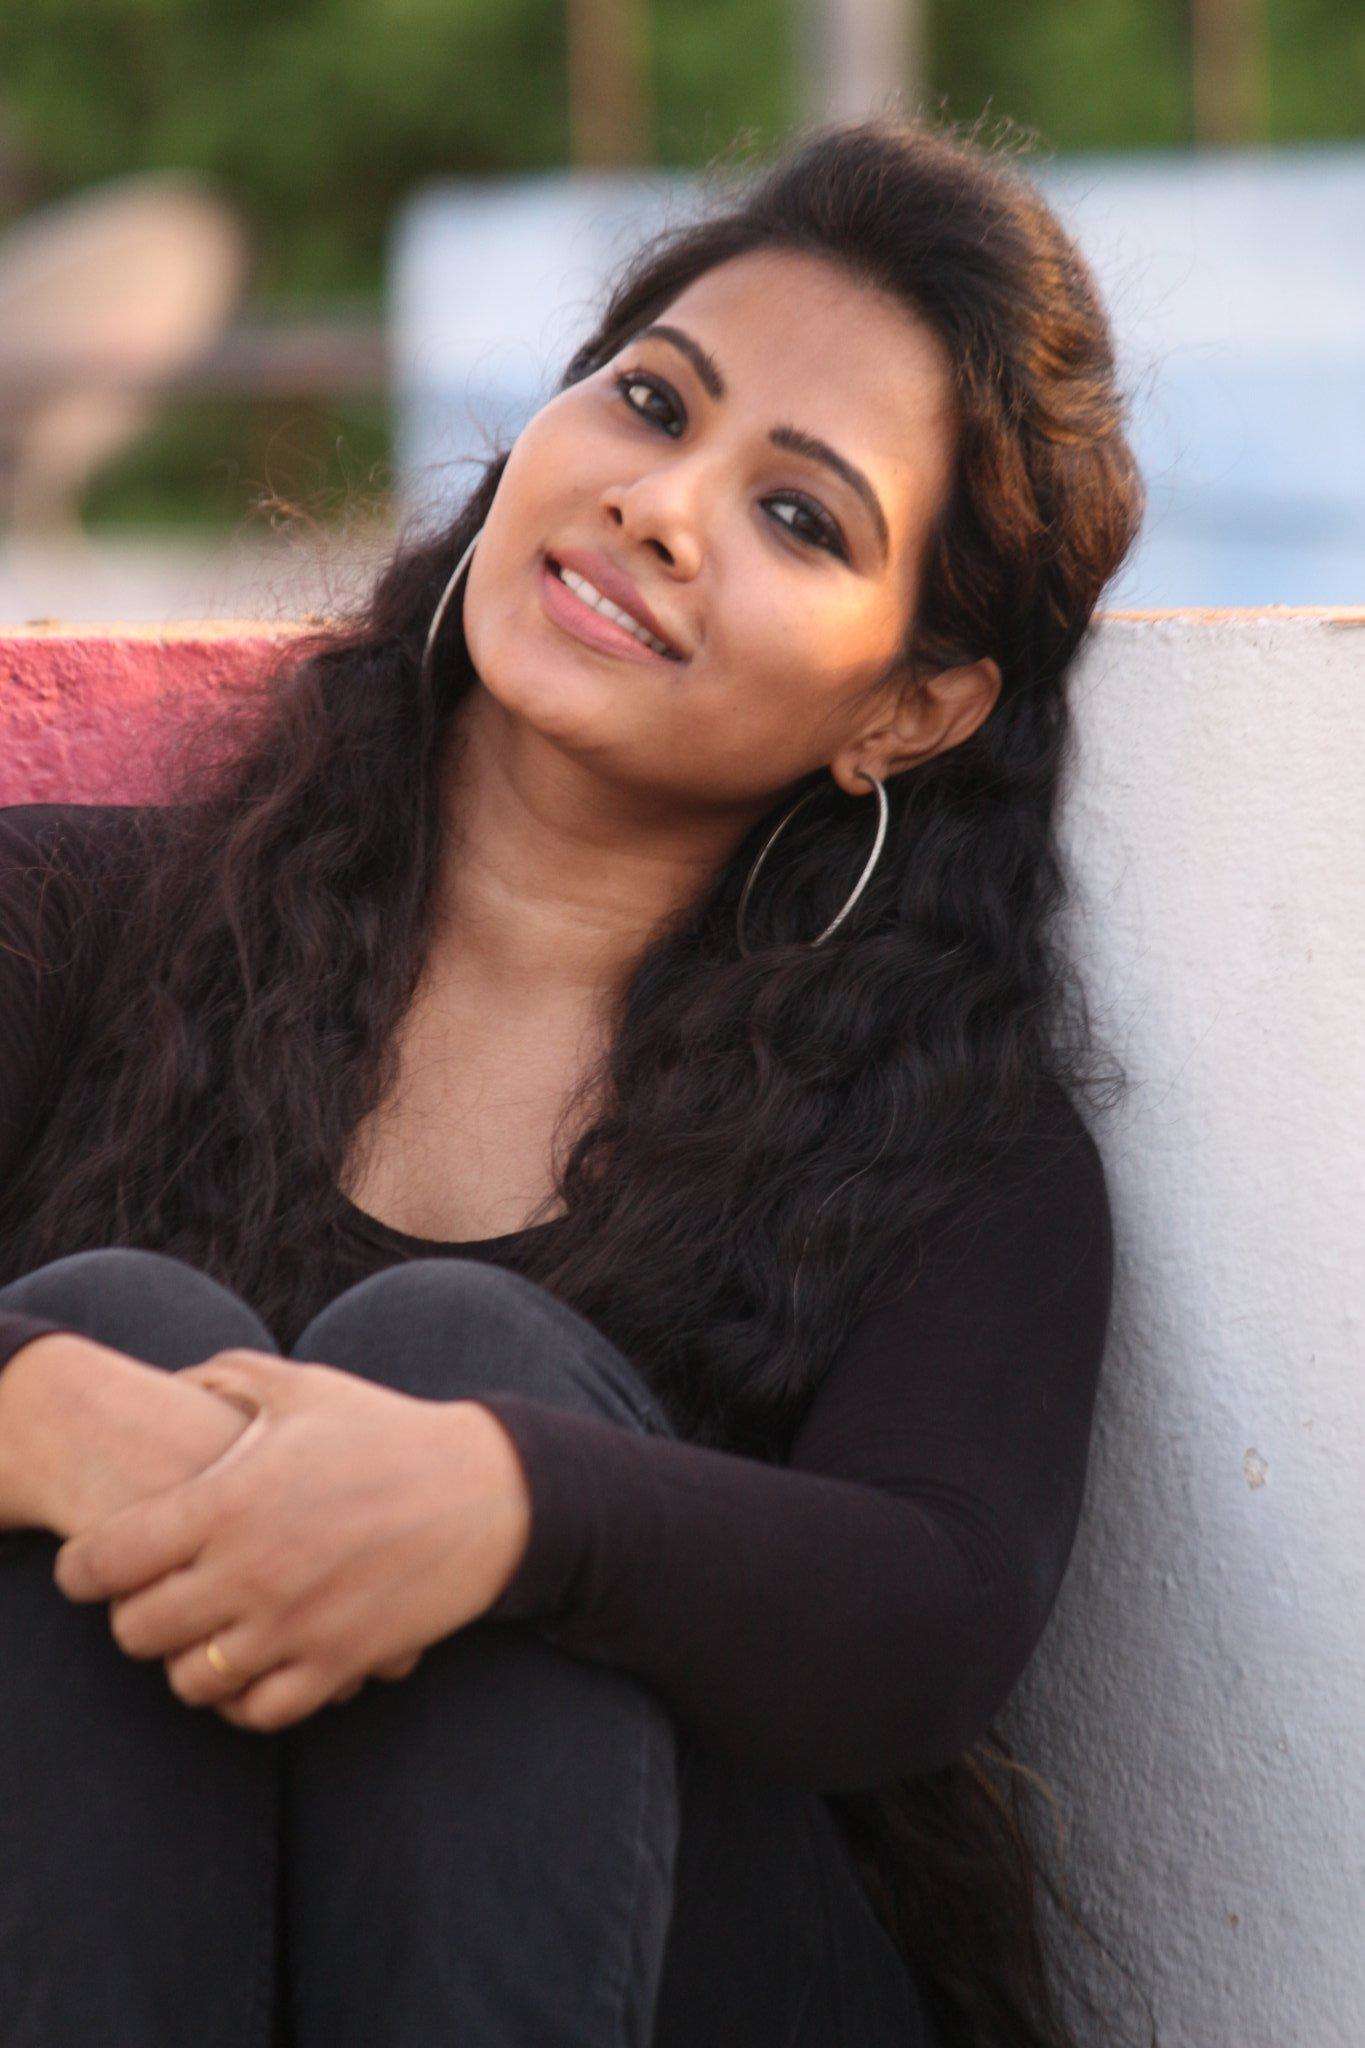 Dhivya Duraisami to have a crack at the big screen with actor Jai